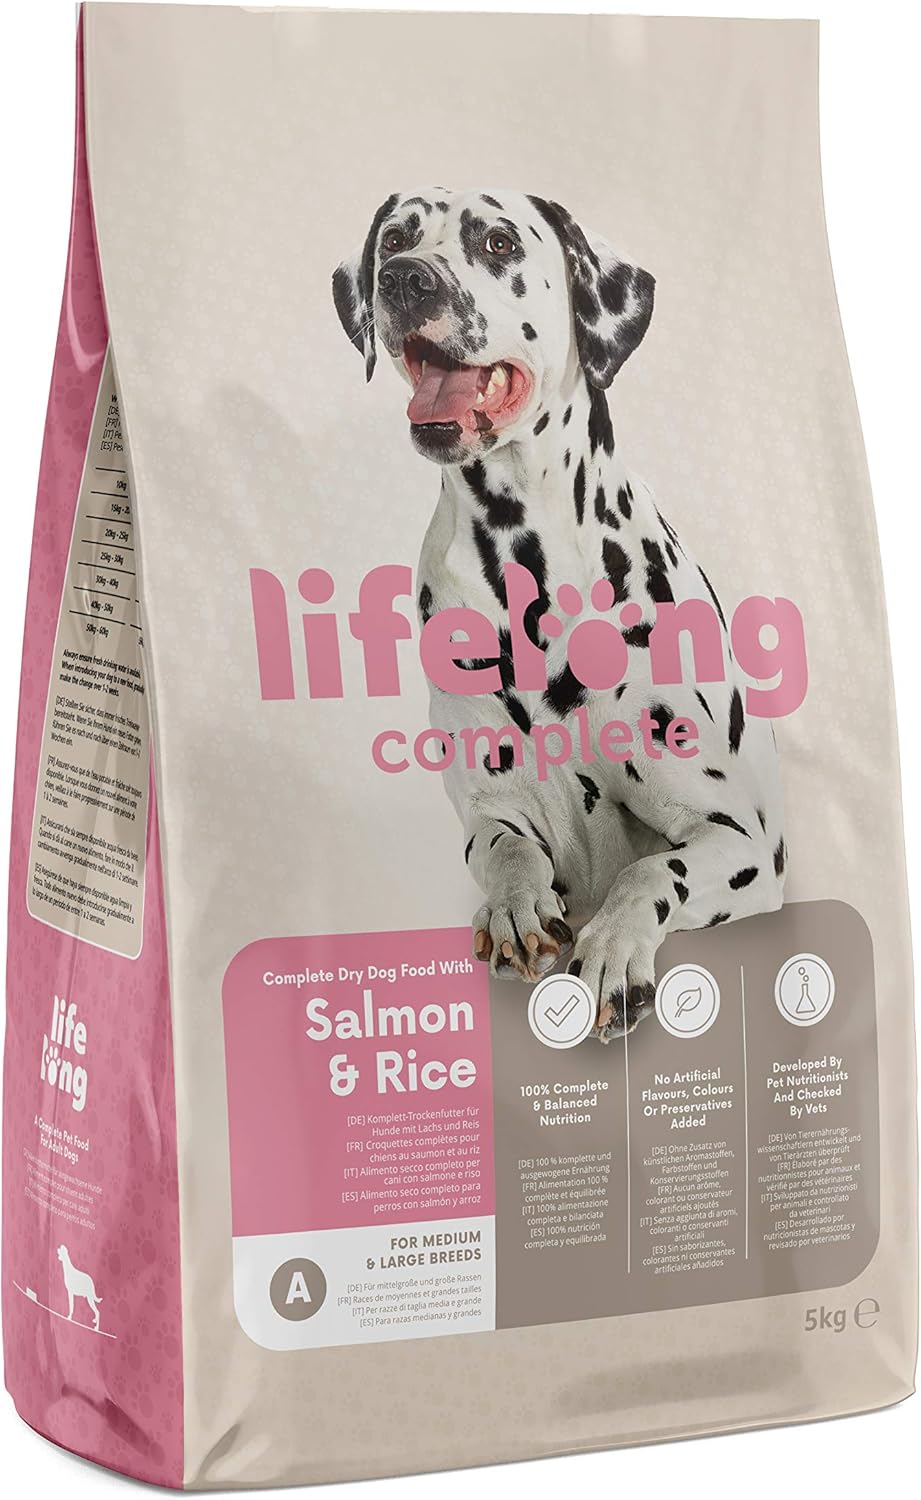 Amazon Brand - Lifelong - Complete Dry Dog Food with Salmon & Rice for Medium and Large Breeds, 1 Pack of 5kg?5400606003507